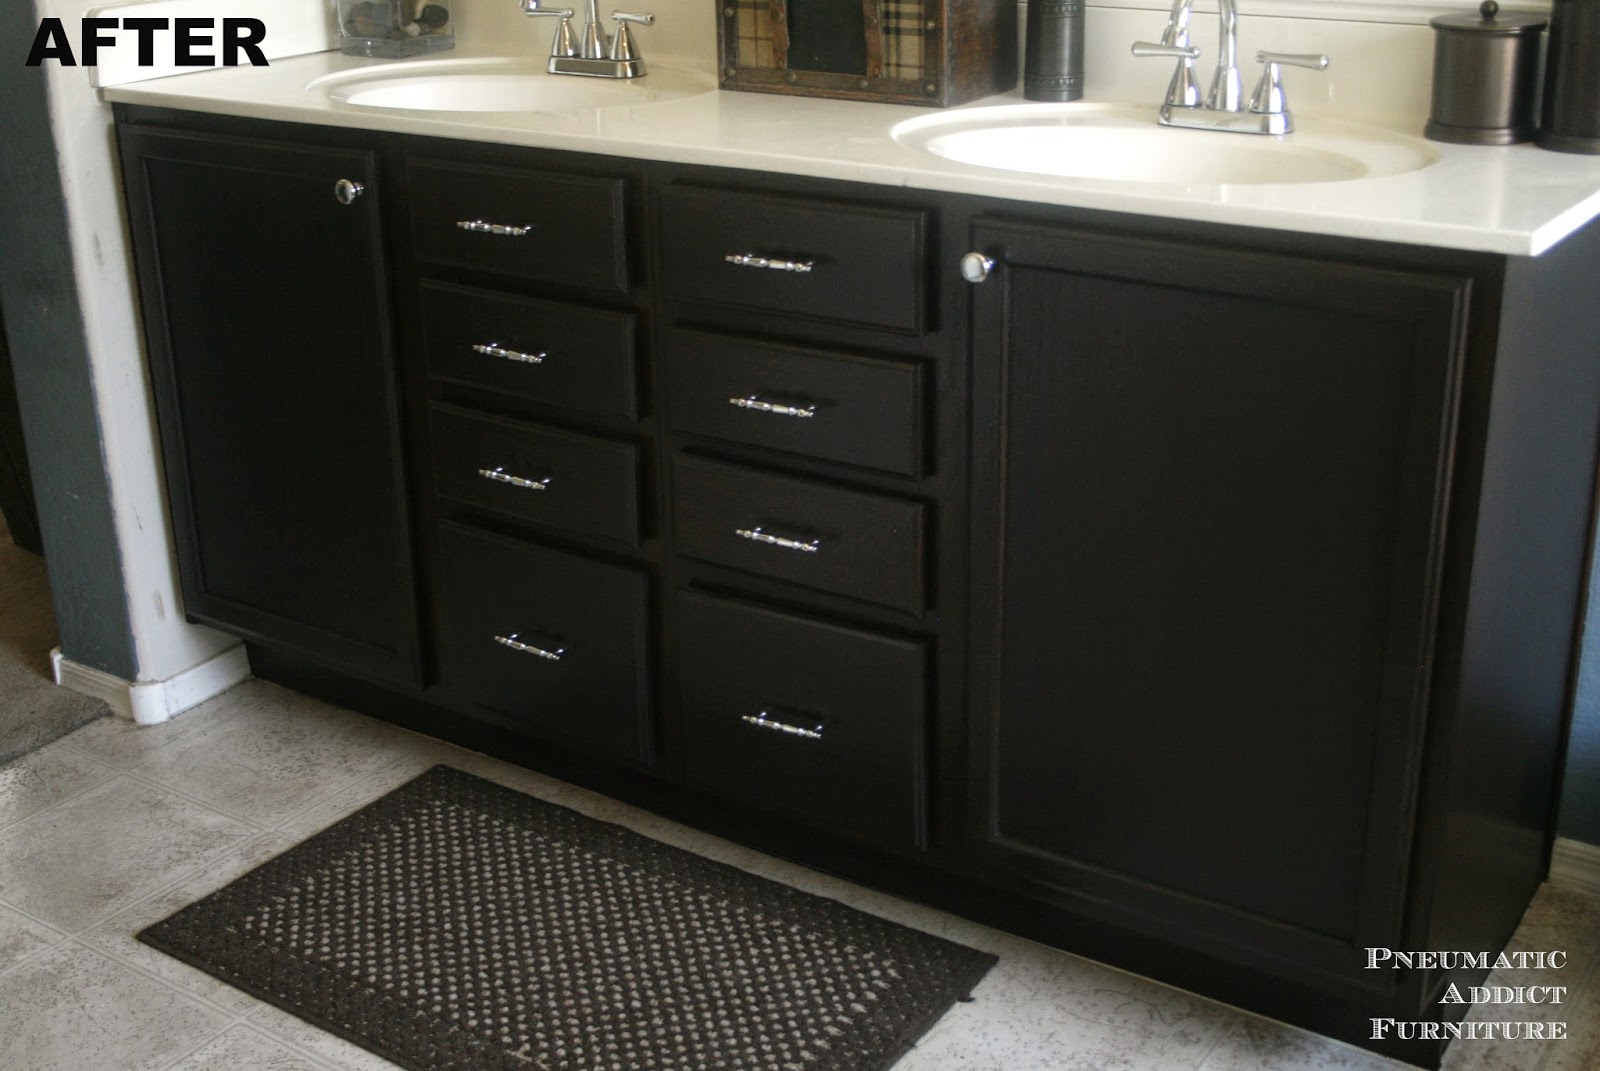 Darken Cabinets Without Stripping The Existing Finish Pneumatic